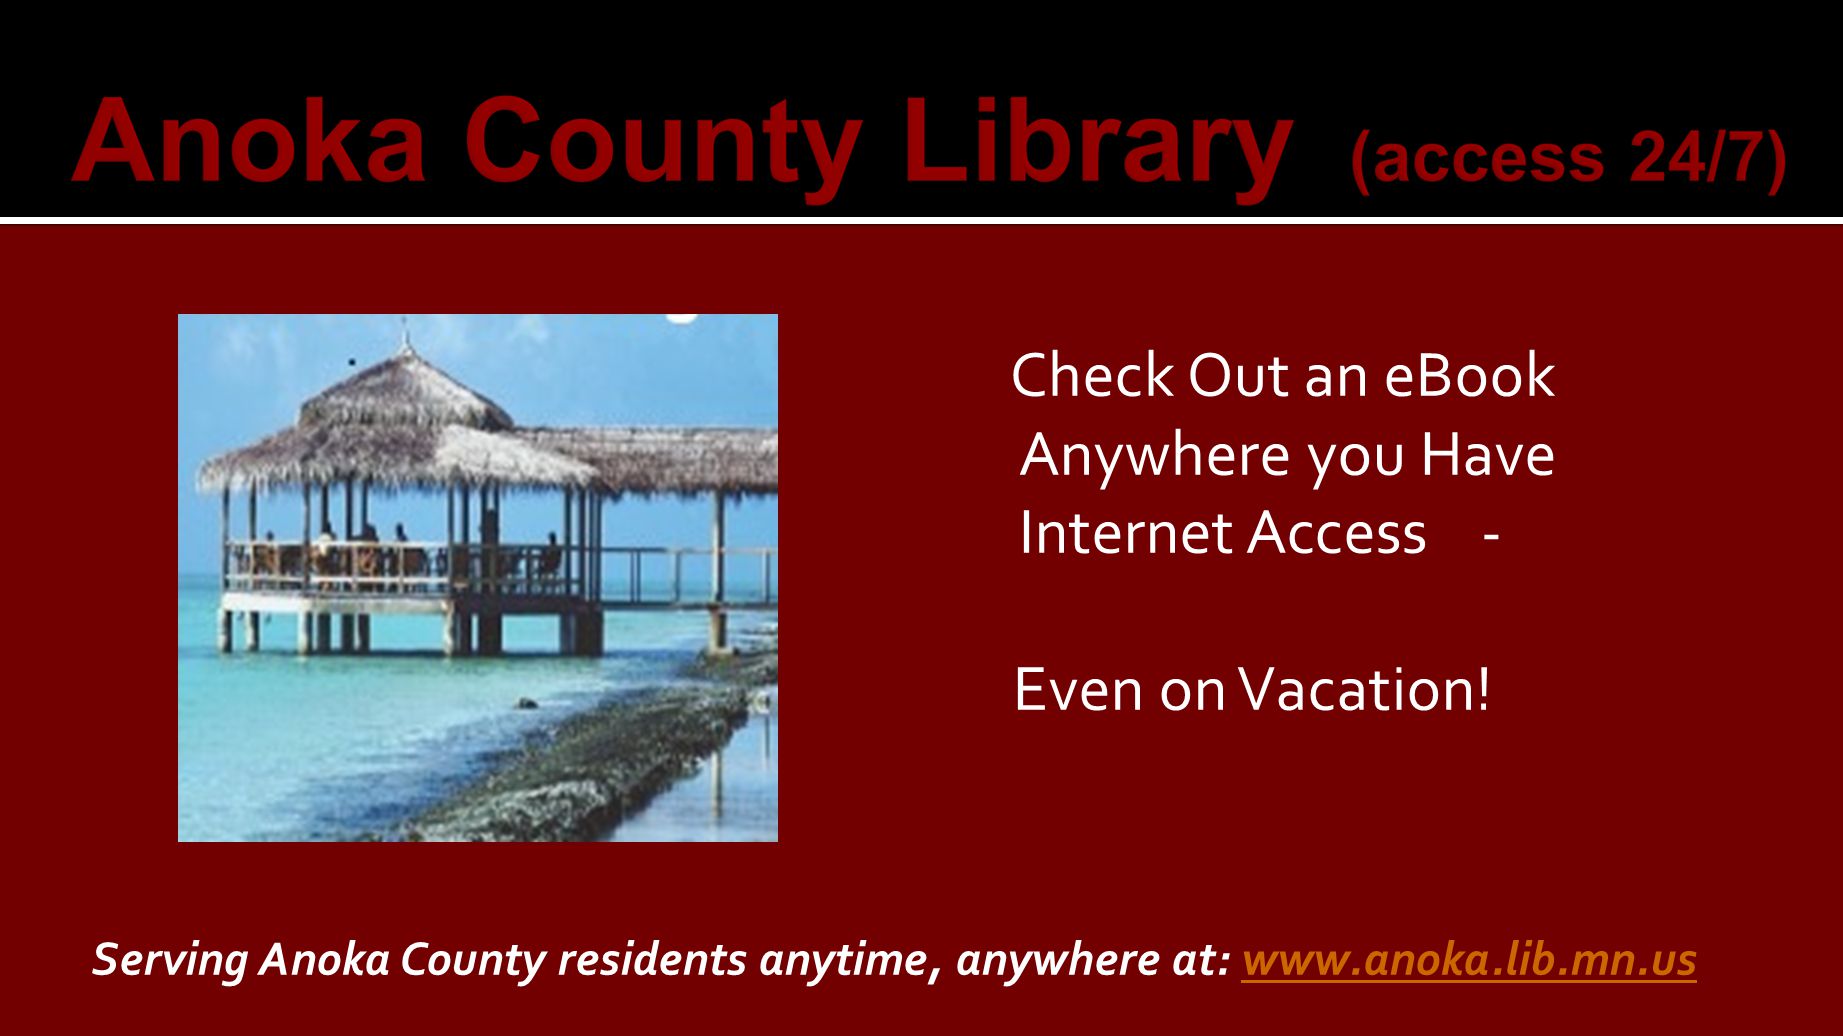 Check Out an eBook Anywhere you Have Internet Access - Even on Vacation.